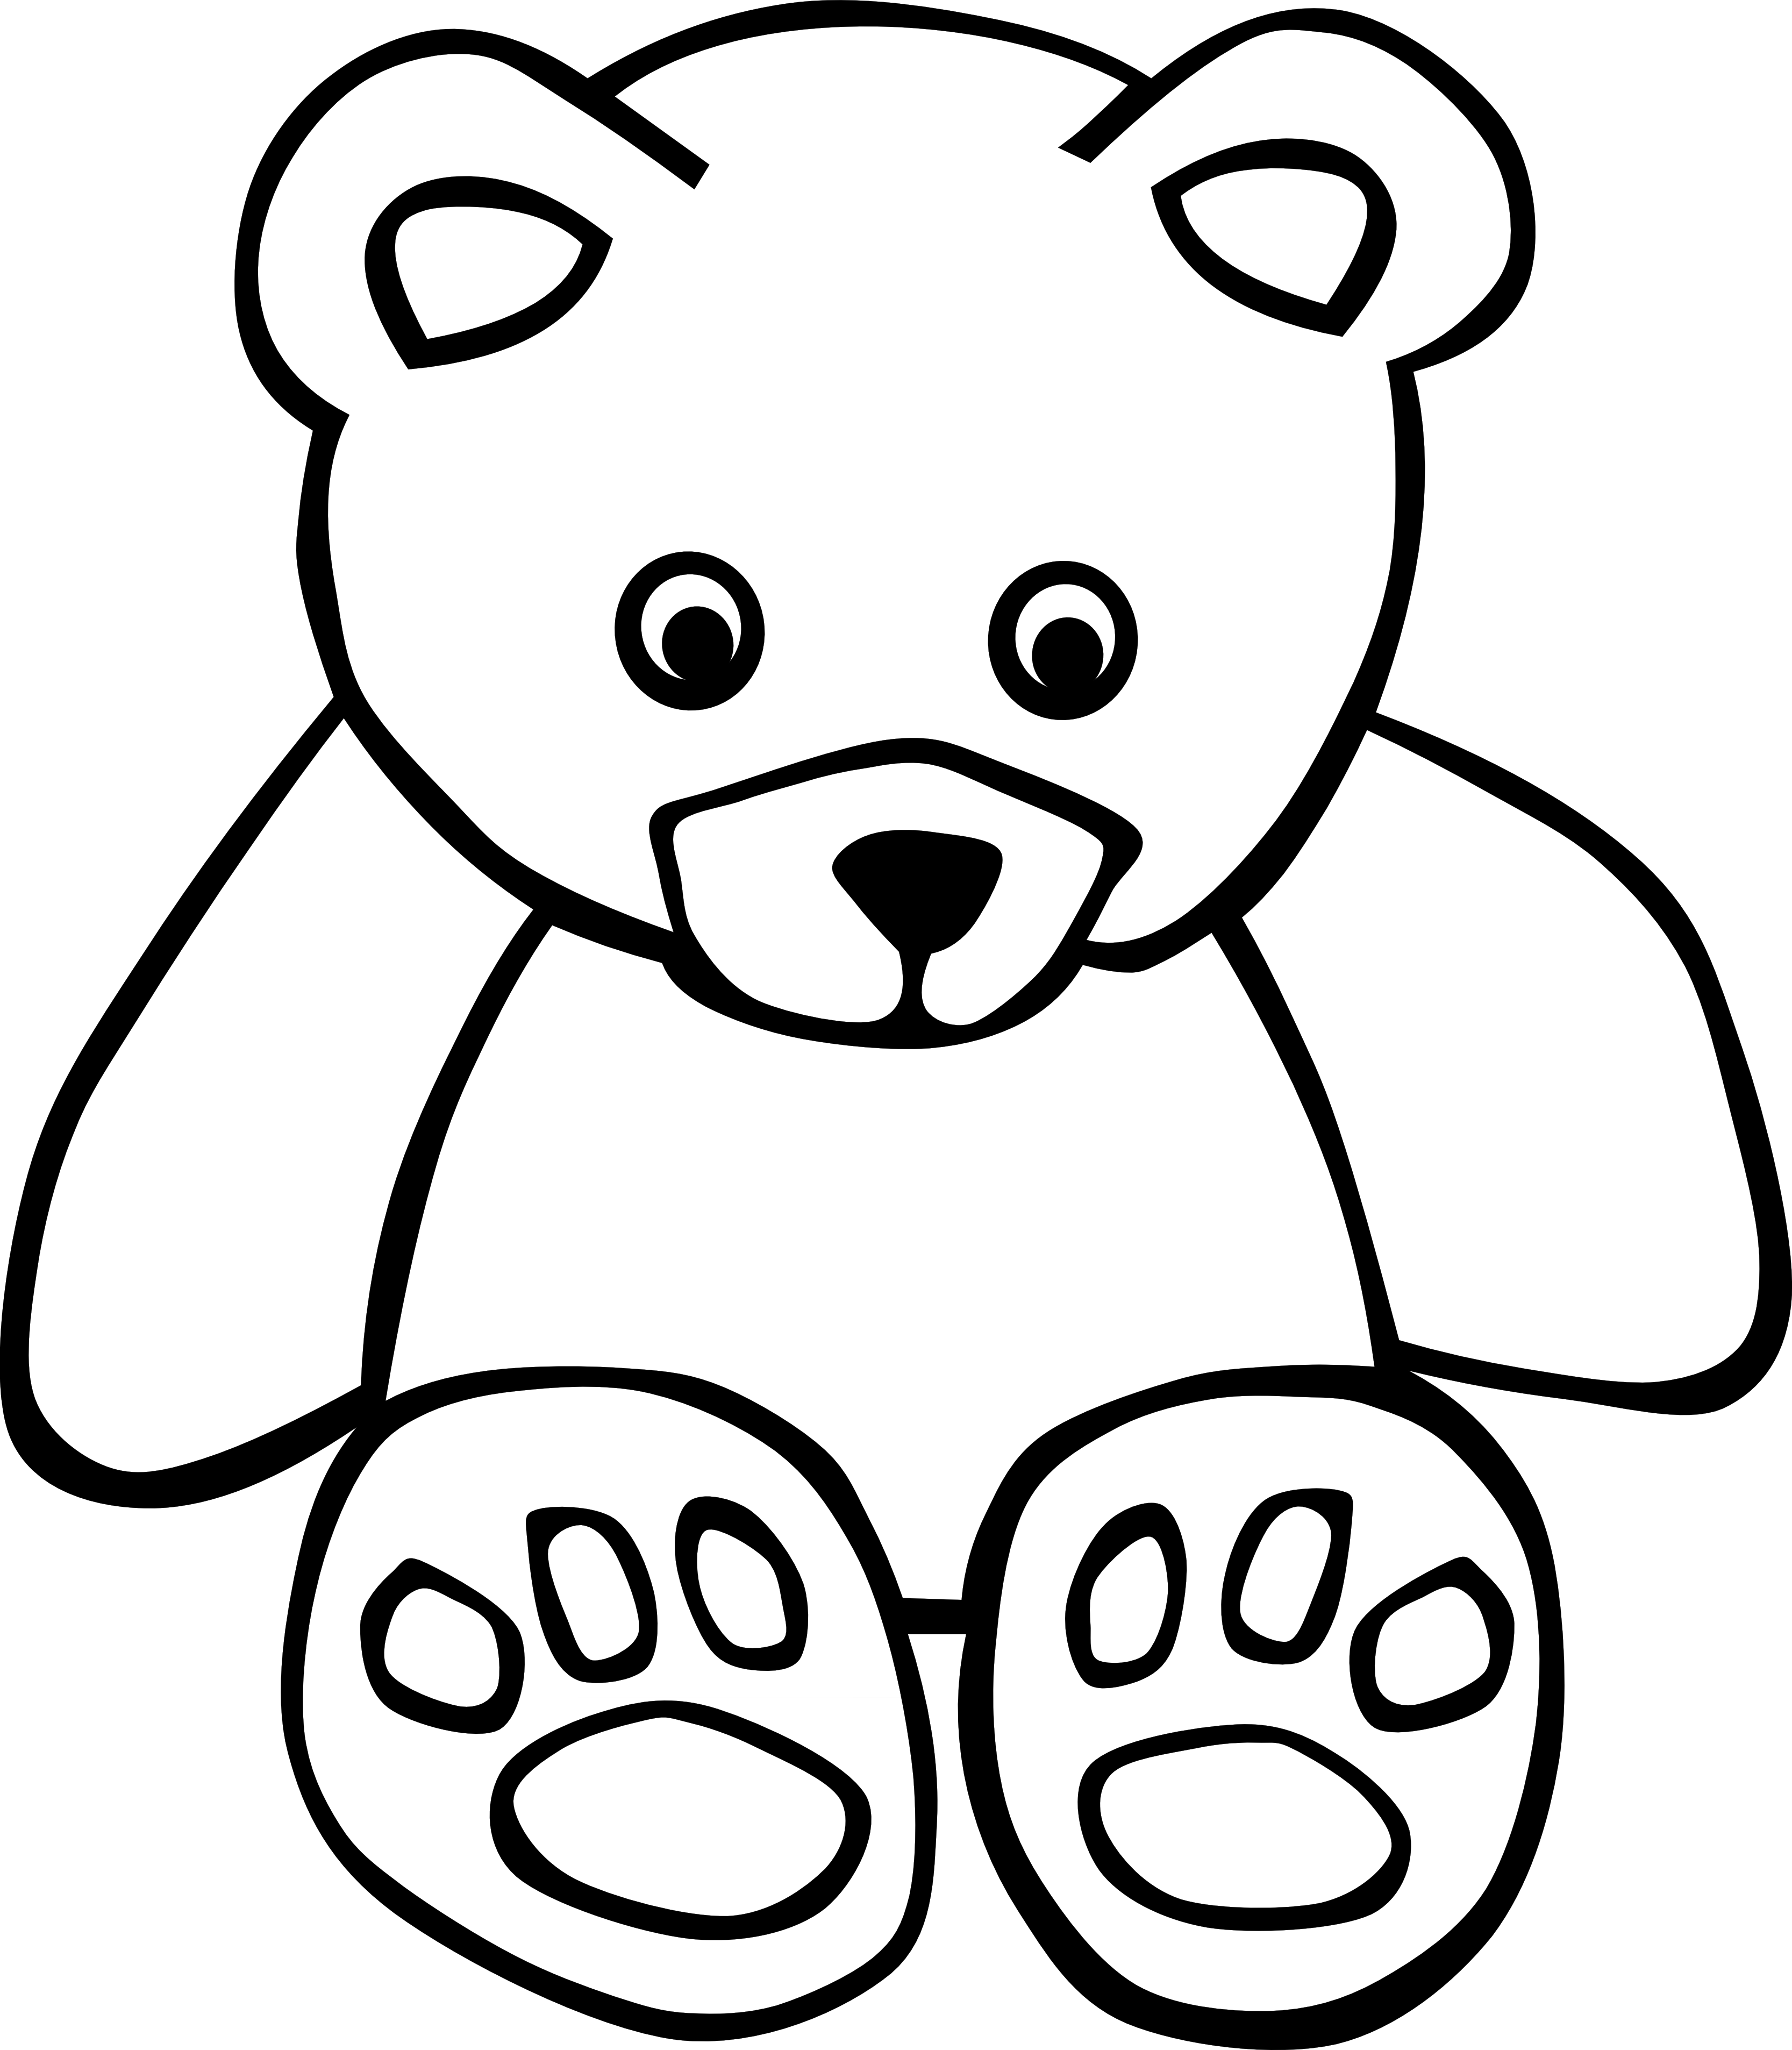 Teddy bear  black and white teddy bear clipart black and white free